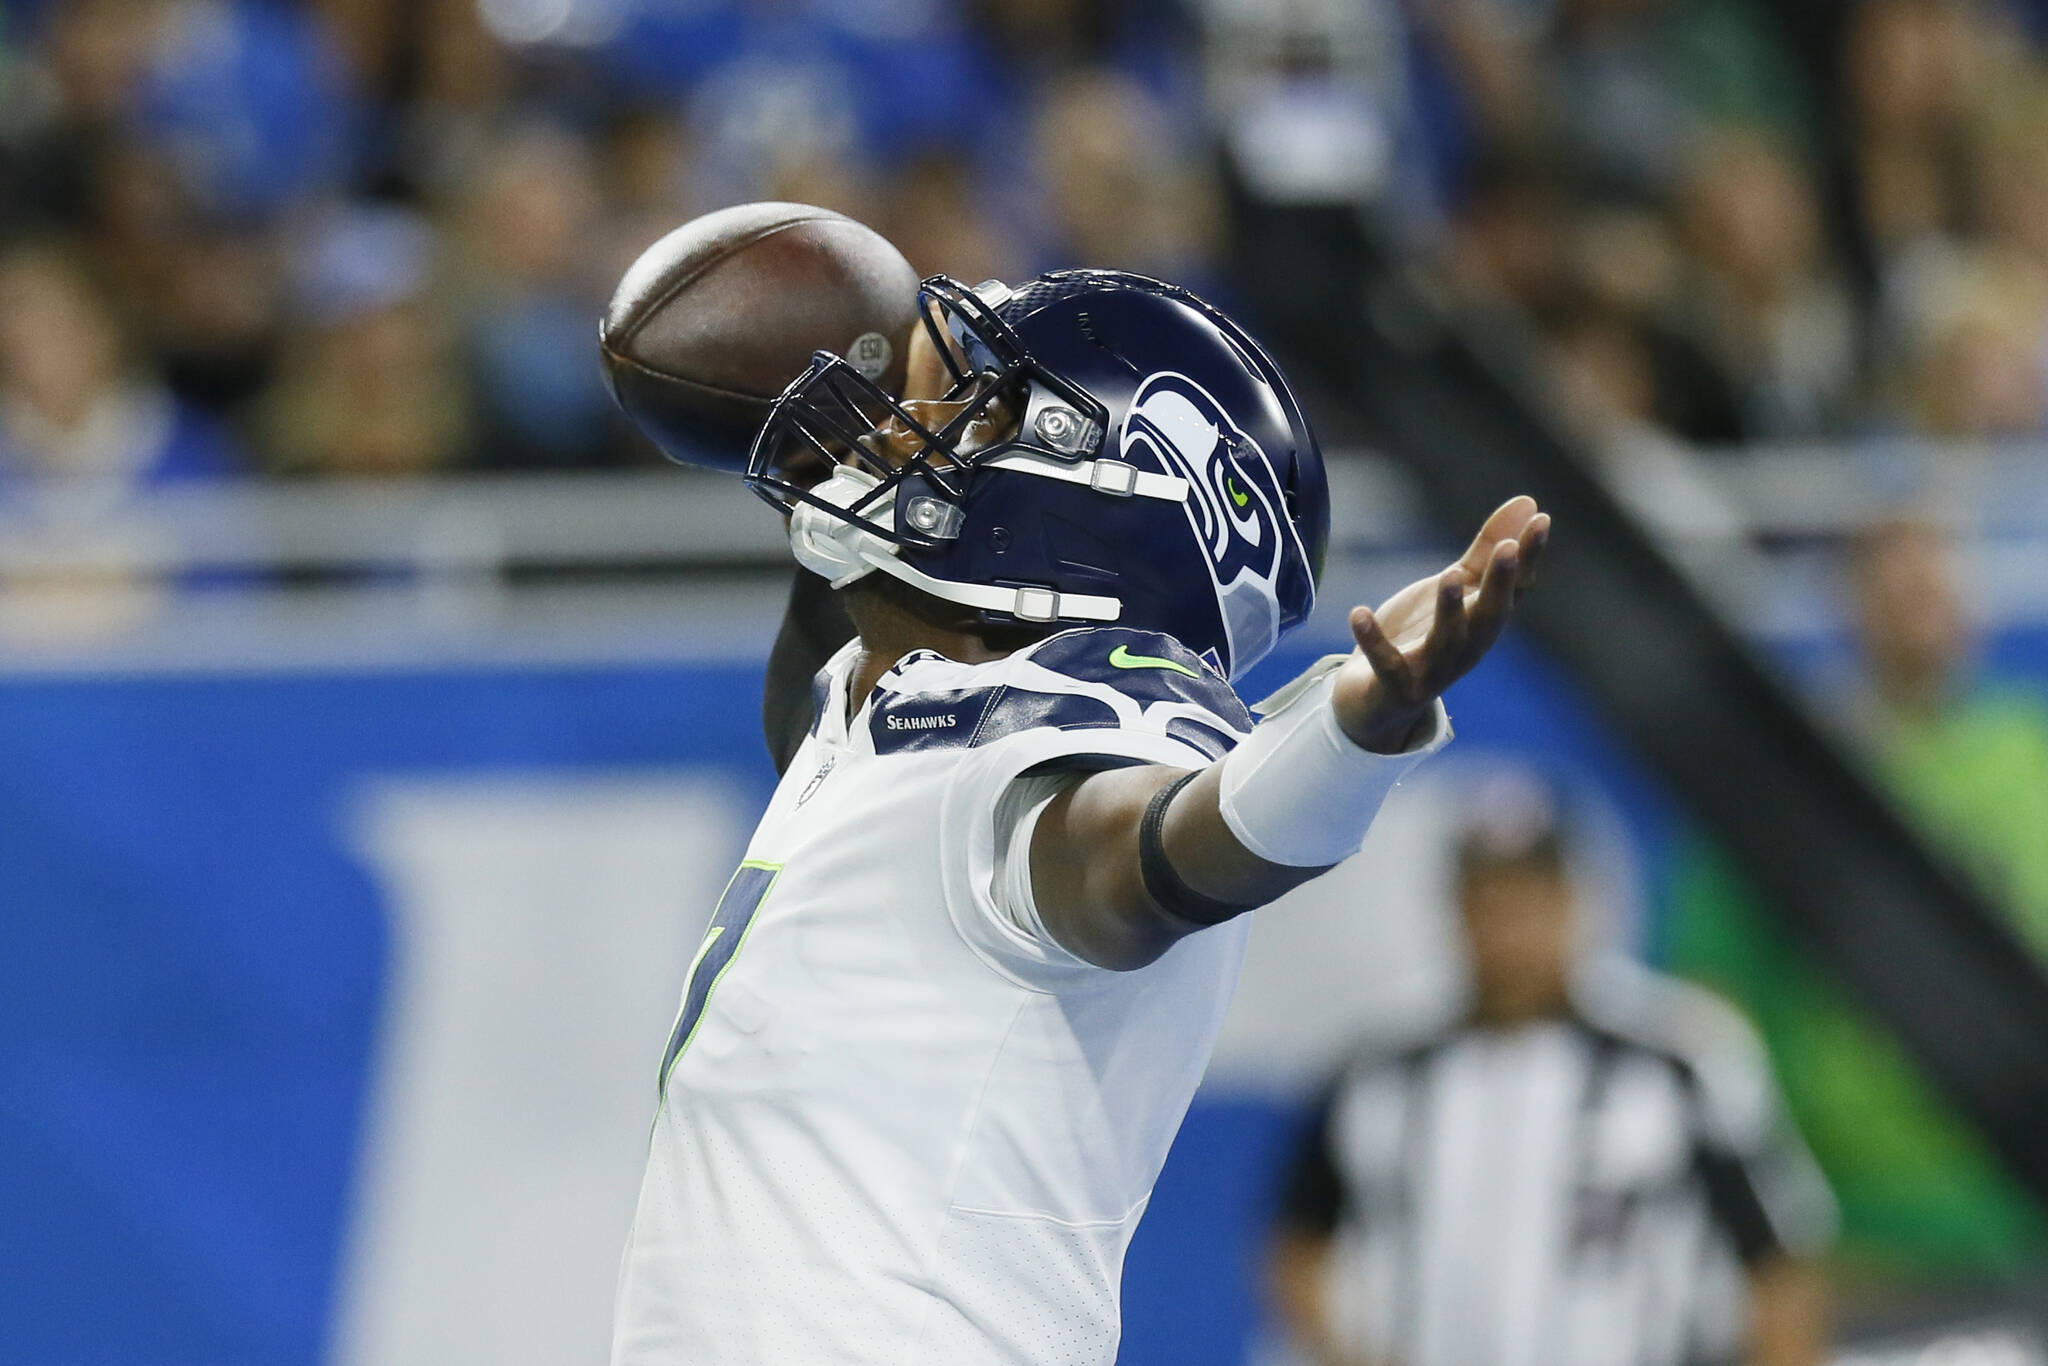 Seattle Seahawks quarterback Geno Smith reacts after his 8-yard touchdown run during the first half of an NFL football game against the Detroit Lions, Sunday, Oct. 2, 2022, in Detroit. (AP Photo/Duane Burleson)